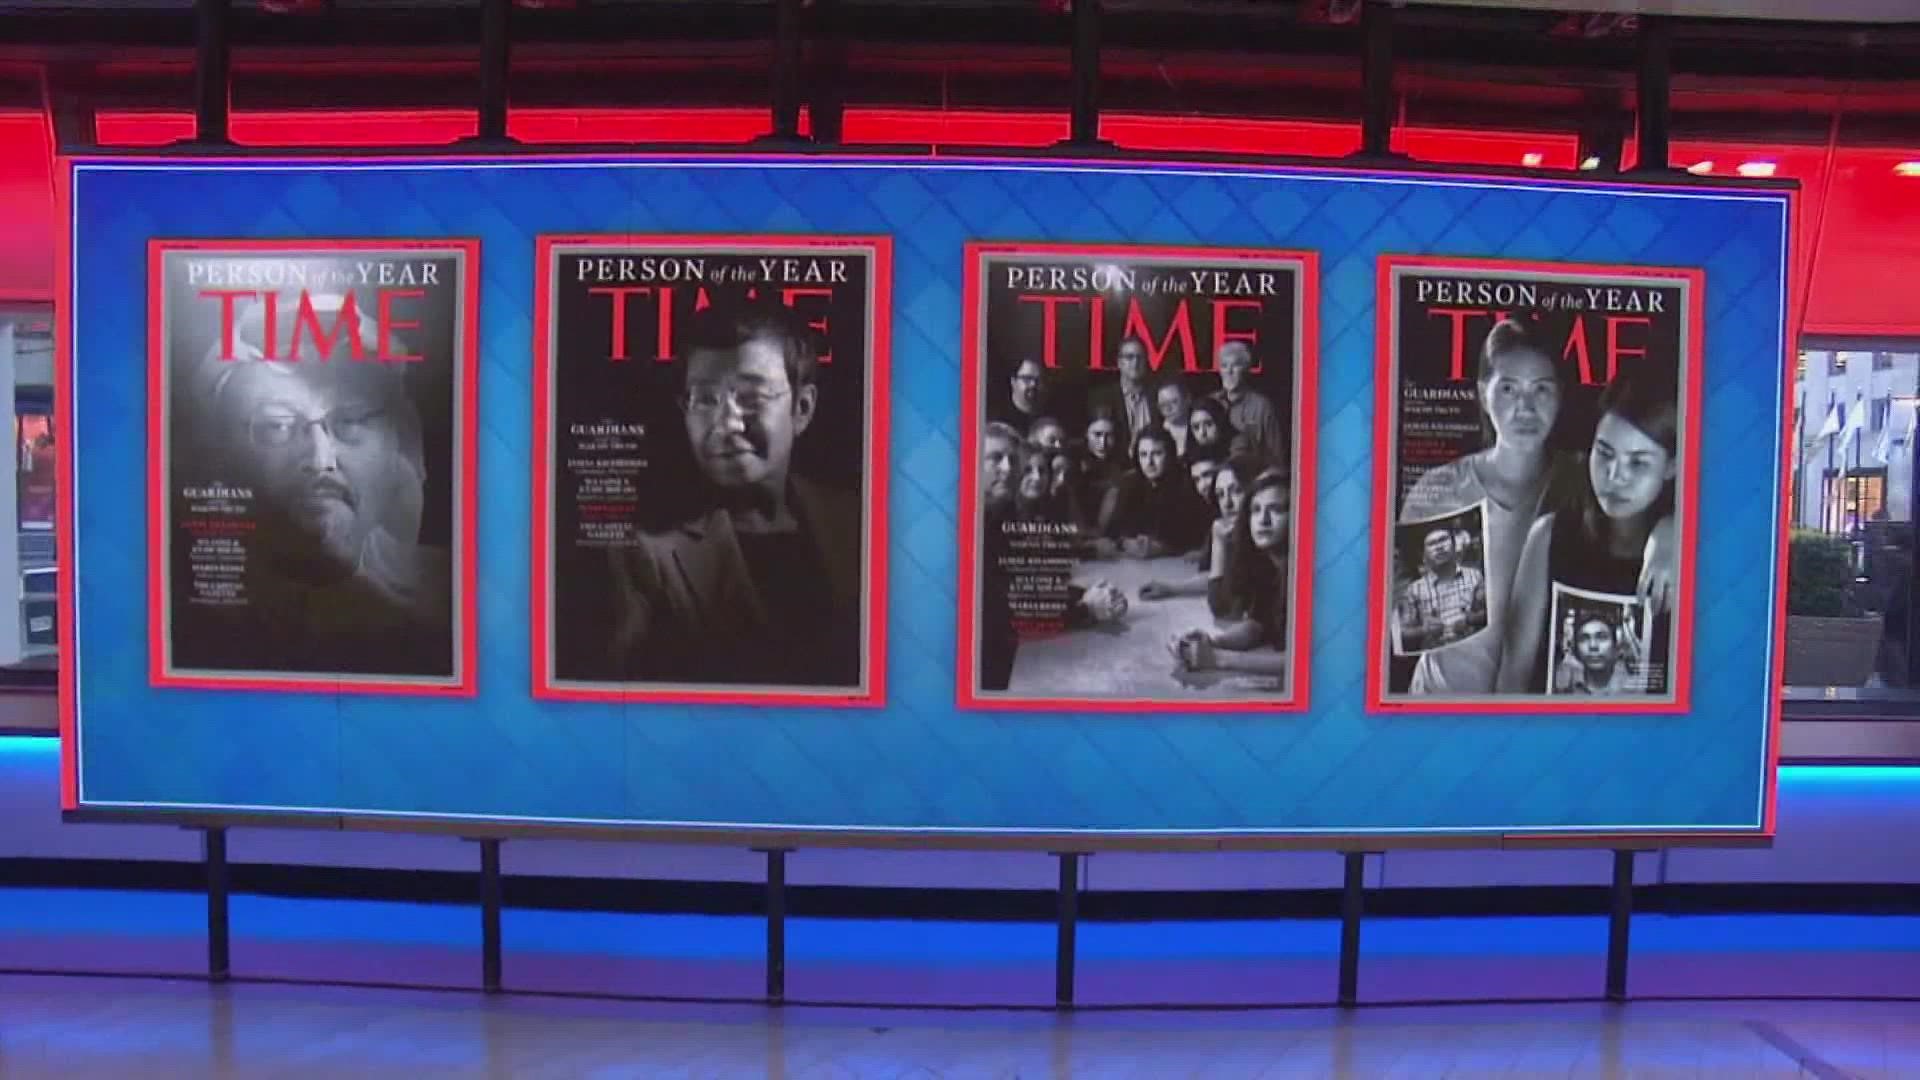 TIME magazine will announce its Person of the Year Wednesday.